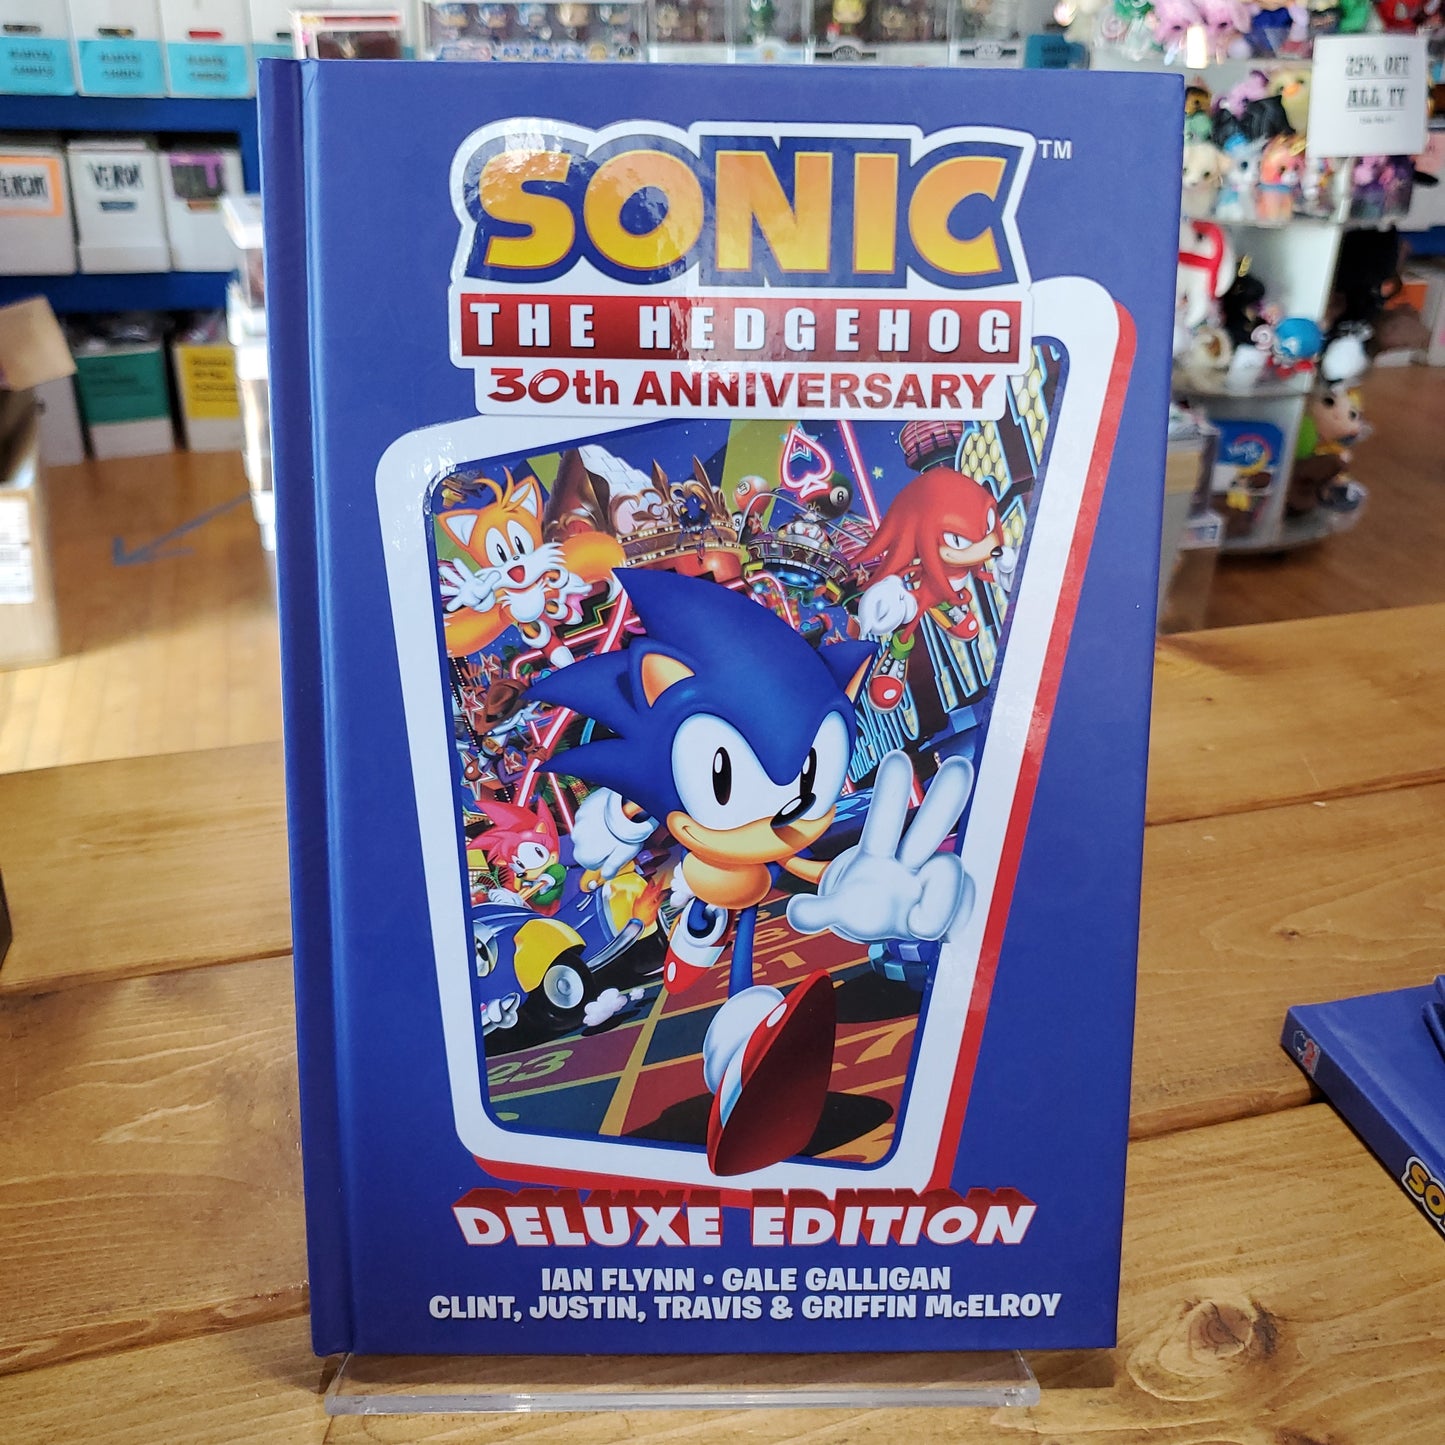 Sonic the Hedgehog 30th Annivesary Deluxe Edition Graphic Novel